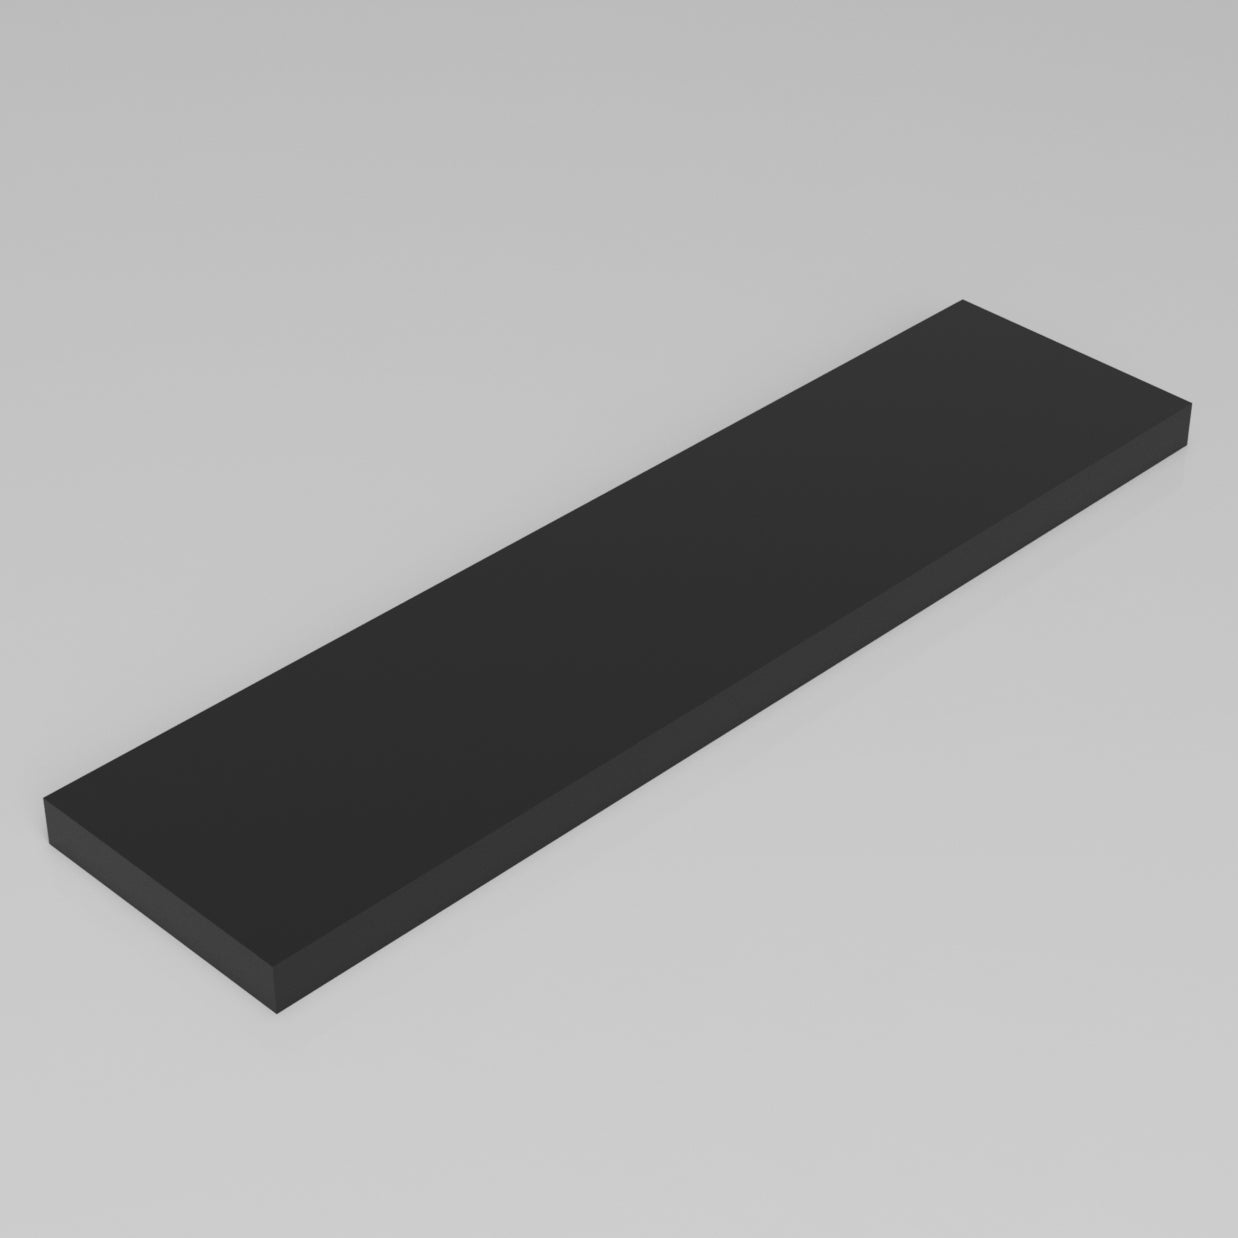 Machinable Wax Rectangular Block Front View 1 Inch by 6 Inch by 24 Inch